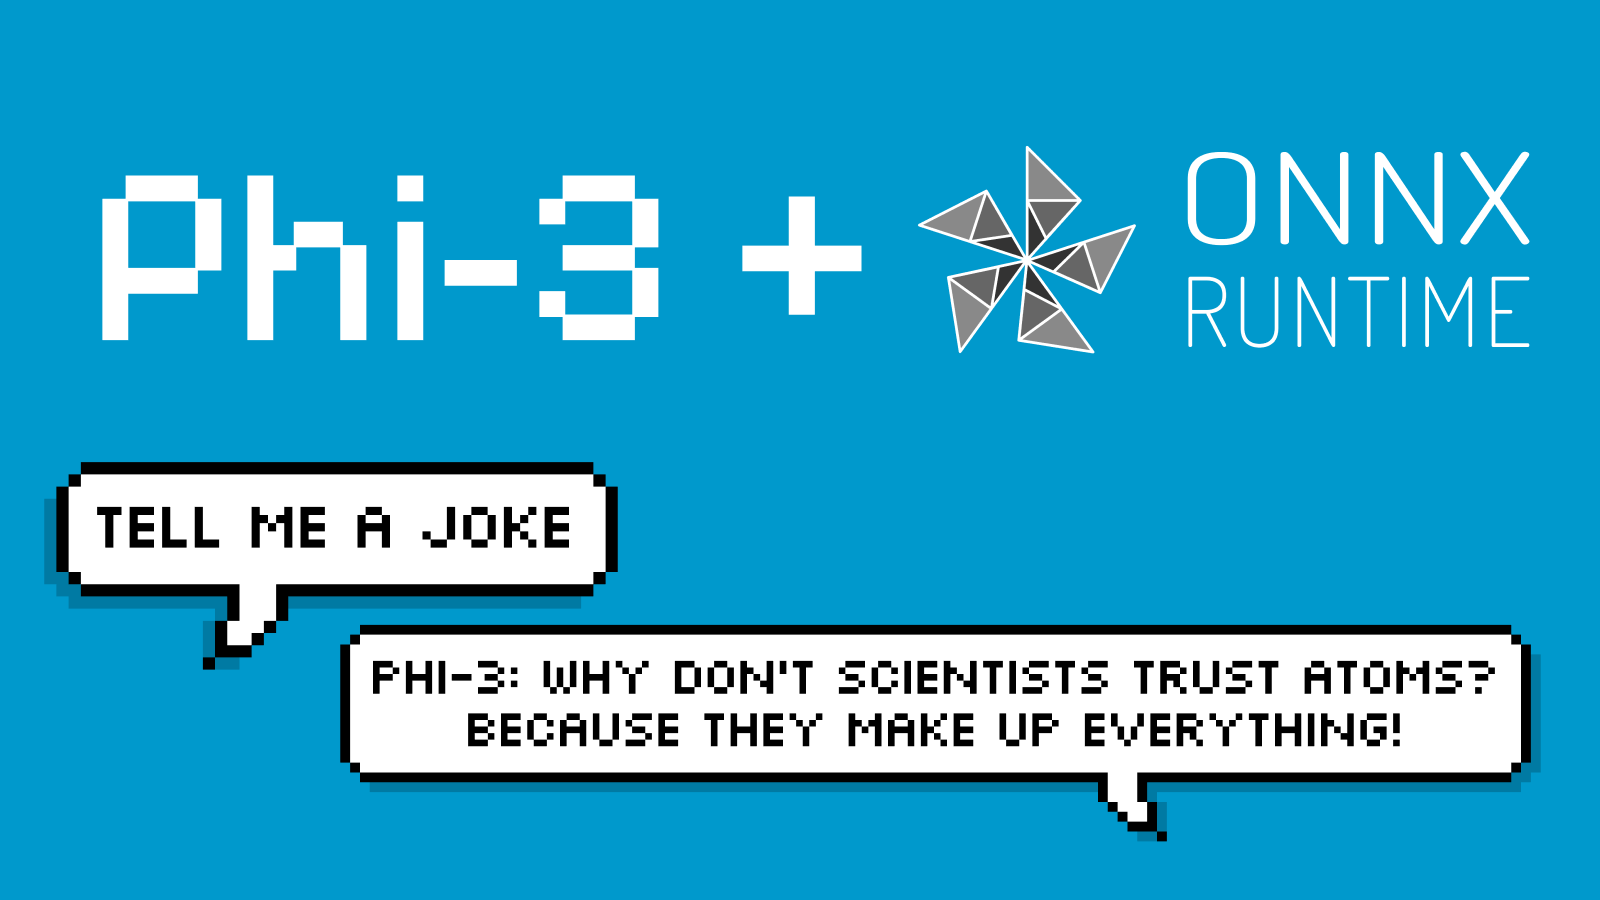 Phi-3 + ONNX Runtime with the prompt "Tell me a joke" and Phi-3 answering: "Why don't scientists trust atoms?" "Because they make up everything!"